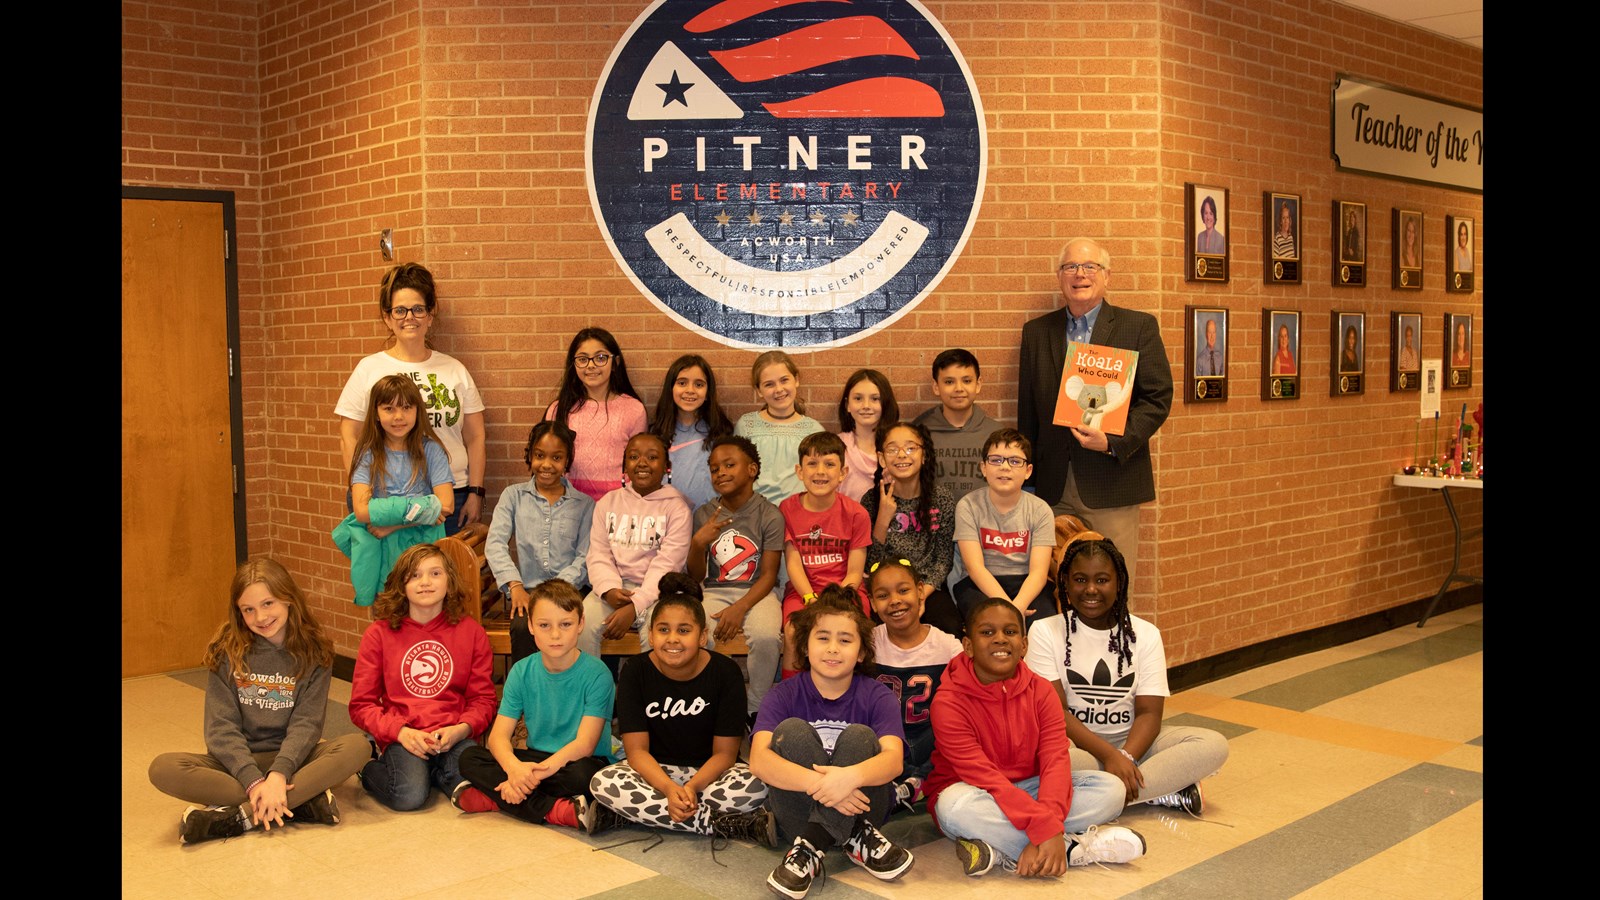 Board Chair David Chastain read to students at PItner Elementary School for Read Across America